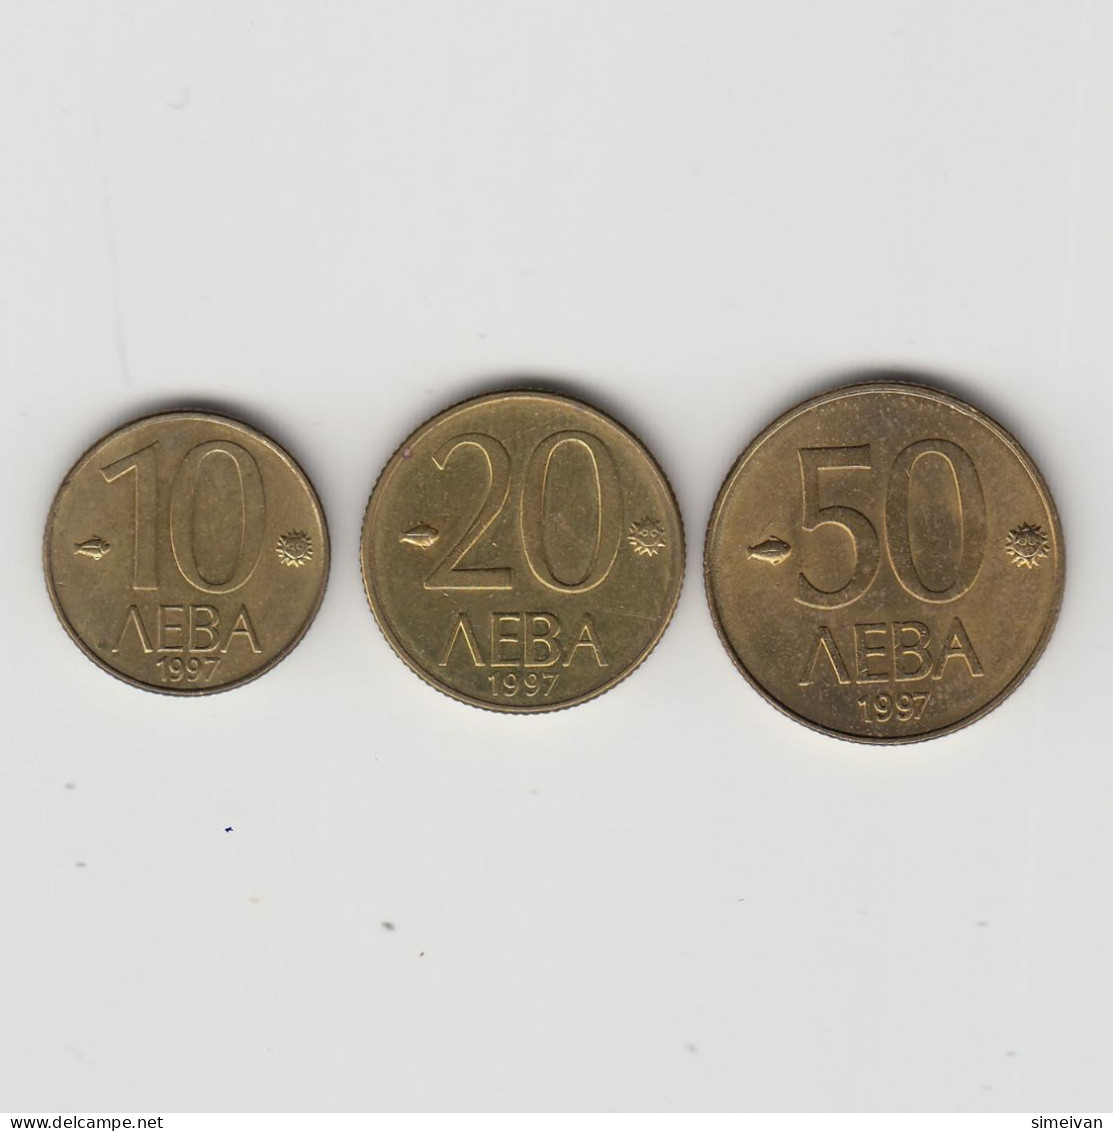 Bulgaria 10, 20, 50 Levа 1997 Coins Europe Currency Set Lot Bulgarie Bulgarien #5410 - Bulgarien